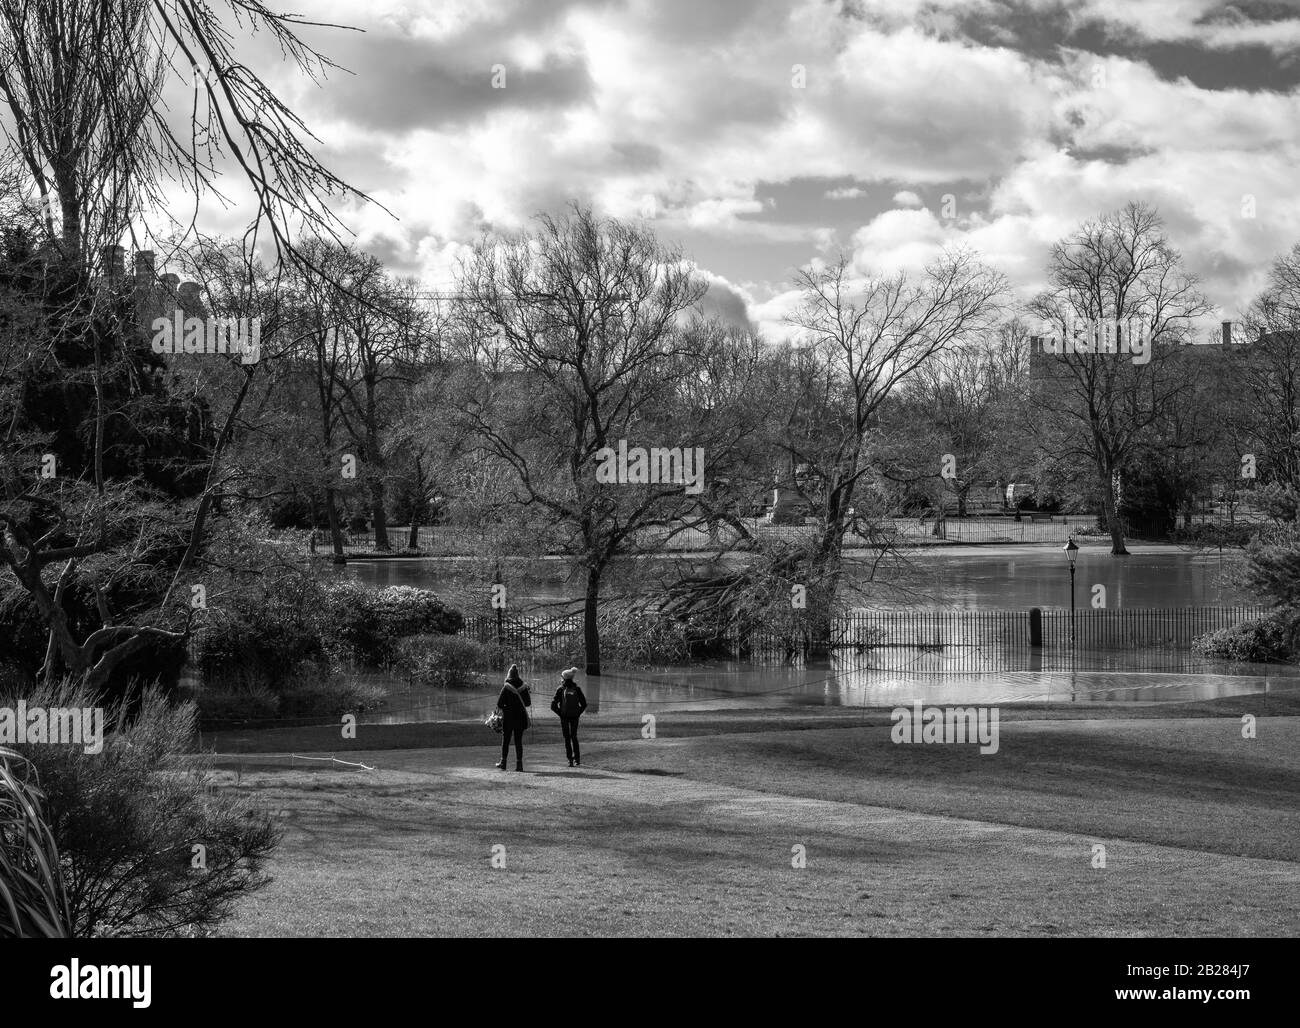 Winter in public gardens in York.  A path stretches down towards a flooded river with a broken tree and two young people look on. Stock Photo